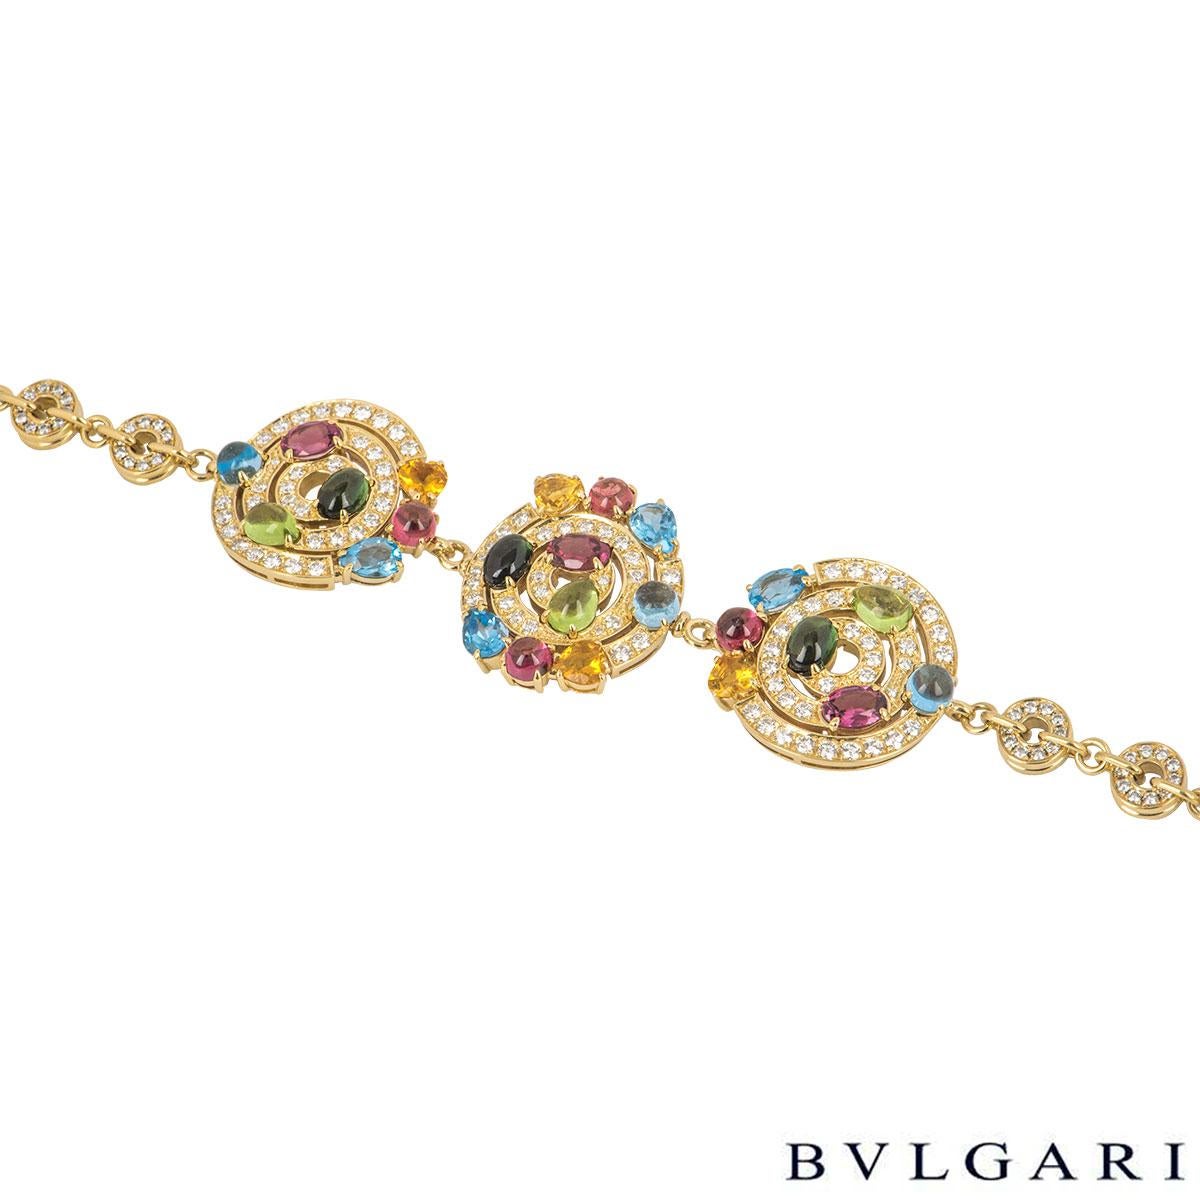 An alluring 18k yellow gold diamond and multi-gemstone bracelet by Bvlgari from the Astrale collection. The bracelet features 3 open work circular motifs in a floral design set with pave round brilliant cut diamonds with blue topaz, tourmaline,